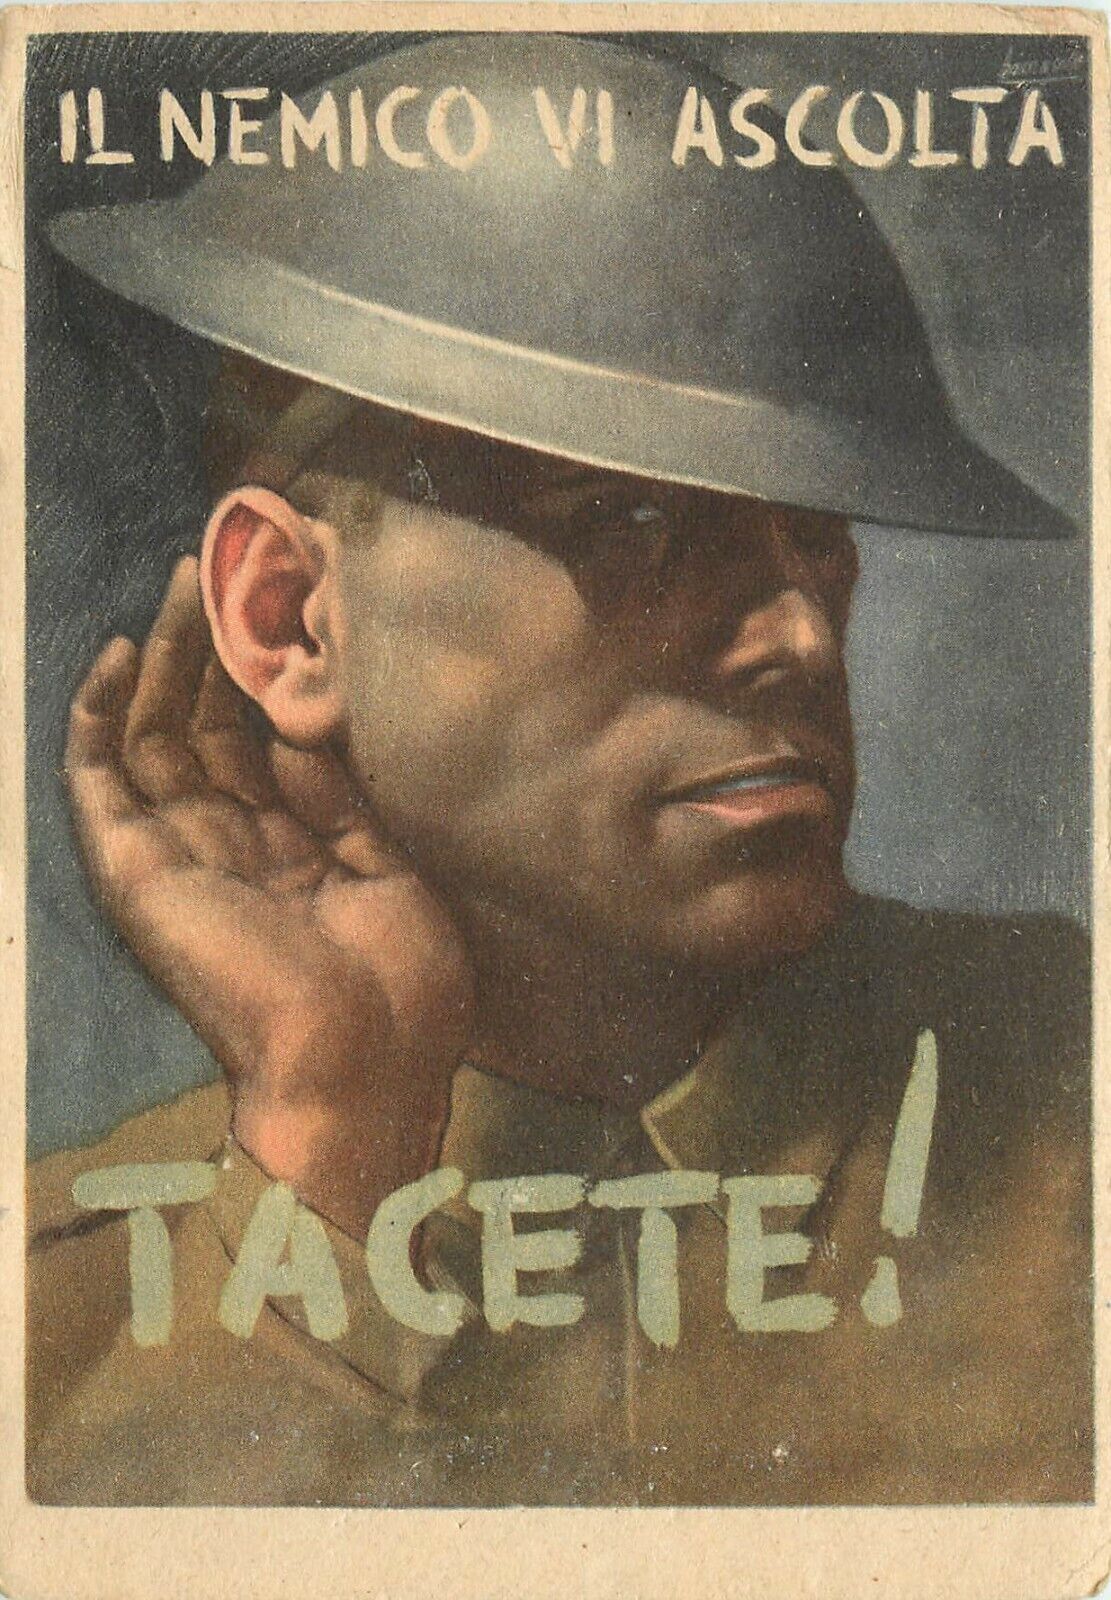 Bocasile WWII Propaganda Postcard Tacete/Quiet Enemy is Listening, Posted 1943